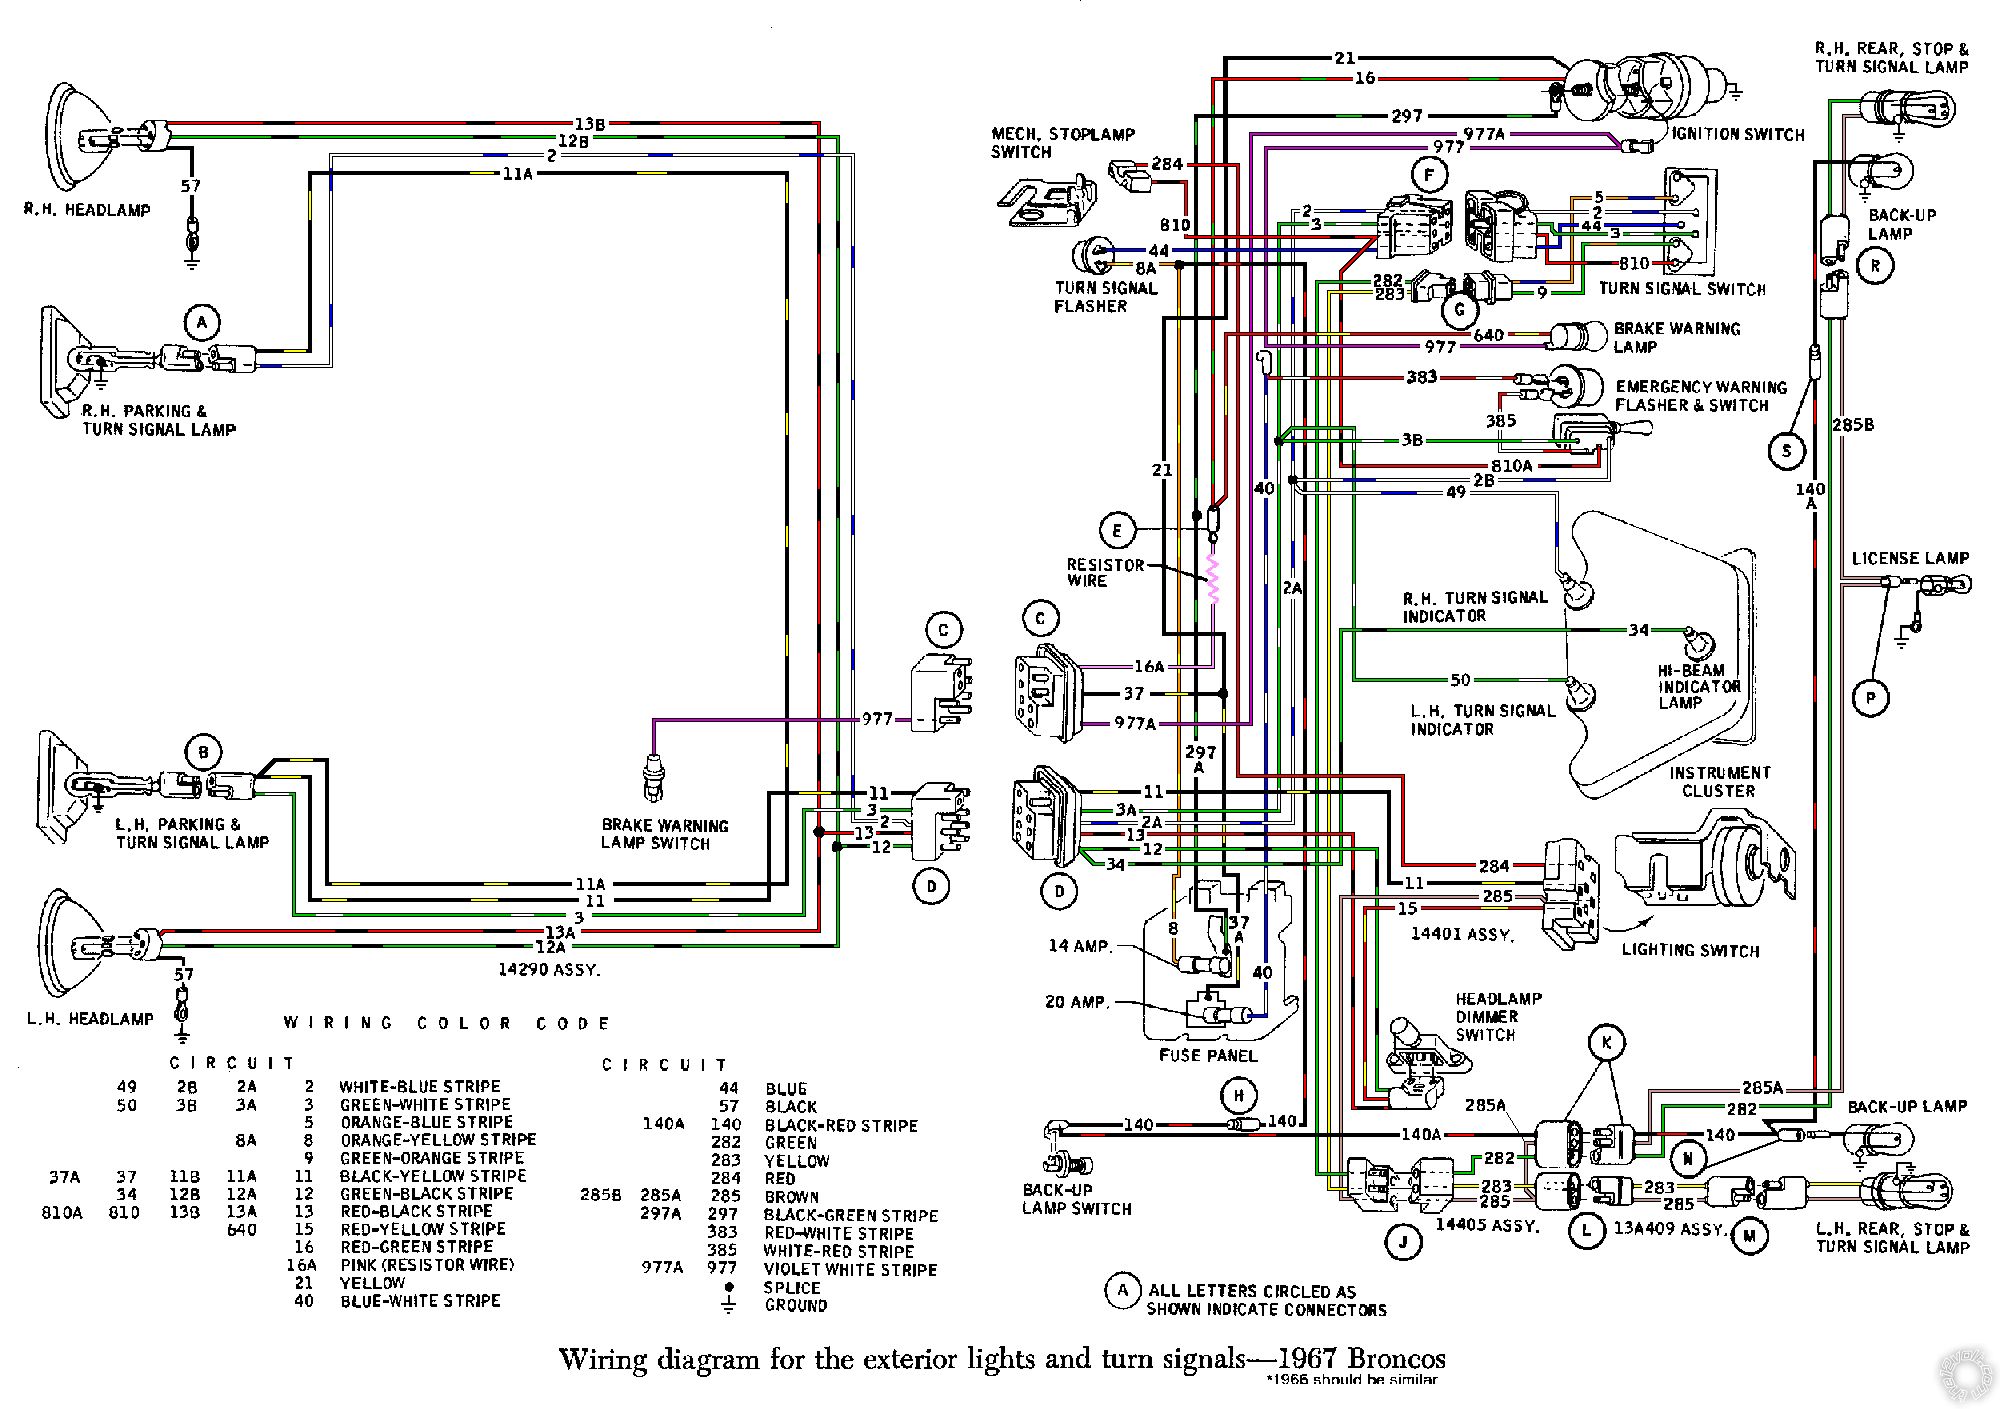 1966 F100 Ignition Switch Wiring Diagram from www.the12volt.com